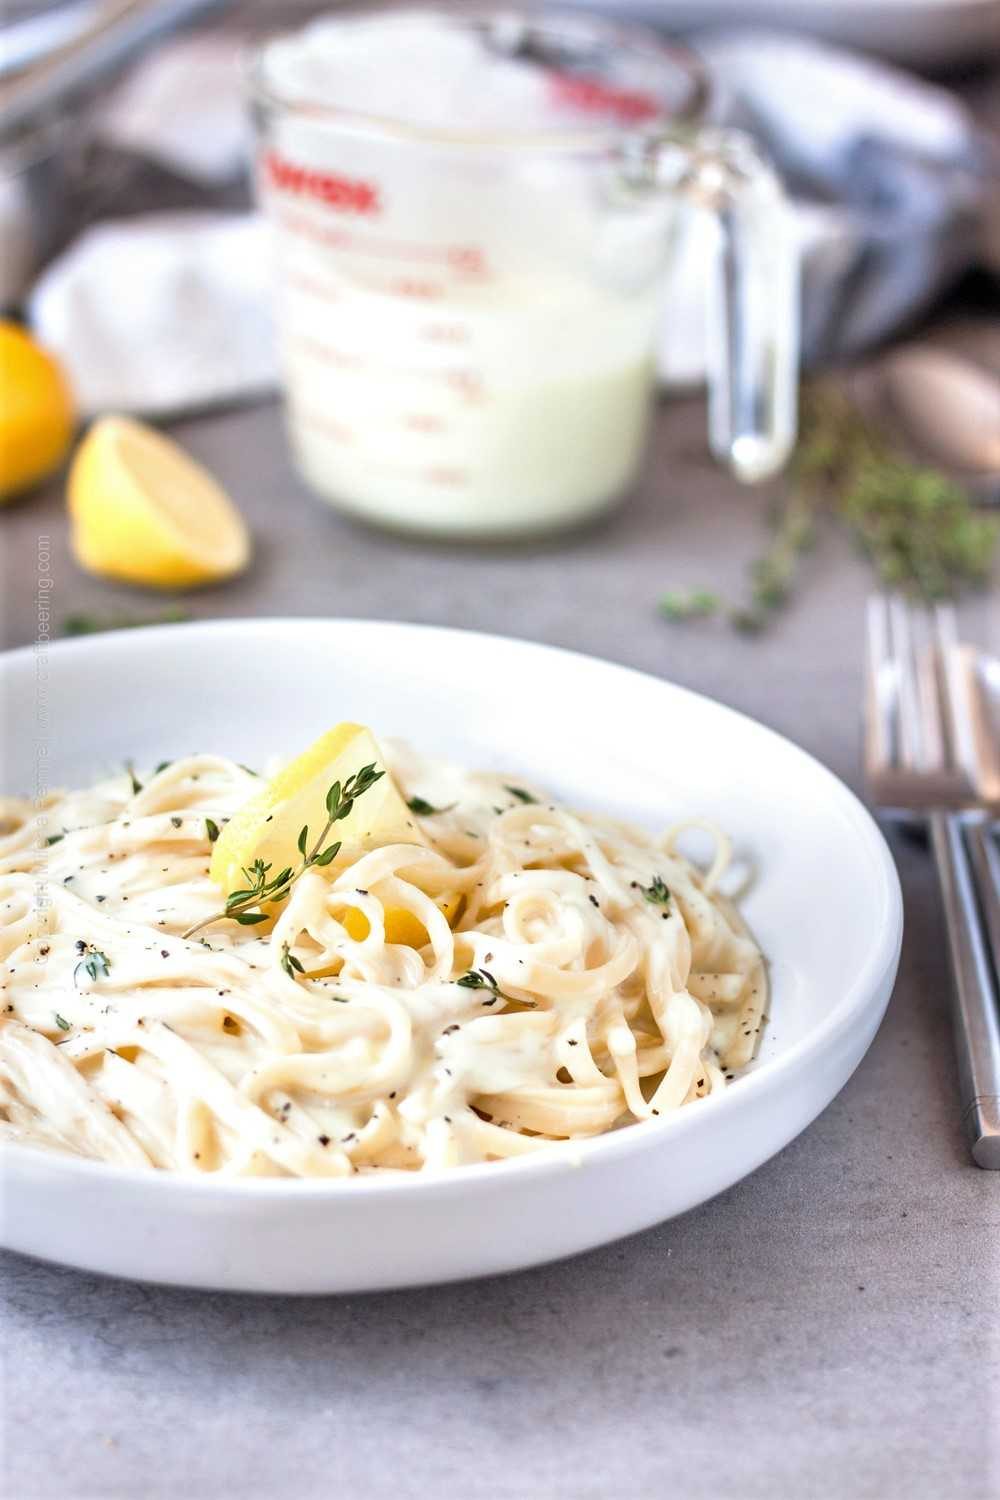 Linguine with lemon cream sauce and thyme